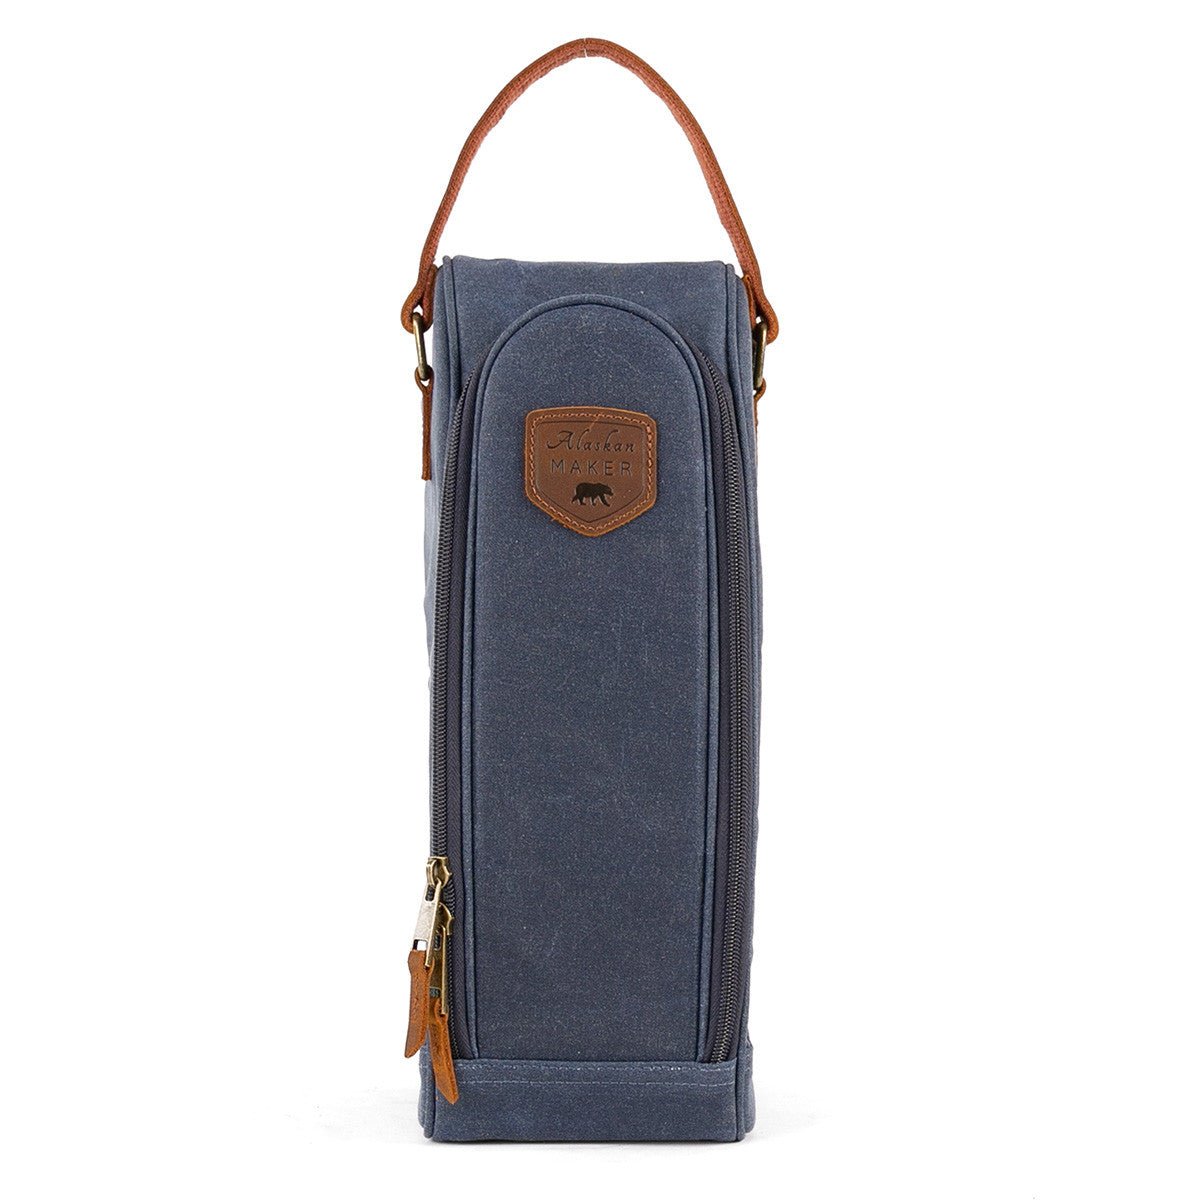 Waxed Canvas Insulated Bottle Bag & Glass Carrier - Life of Riley